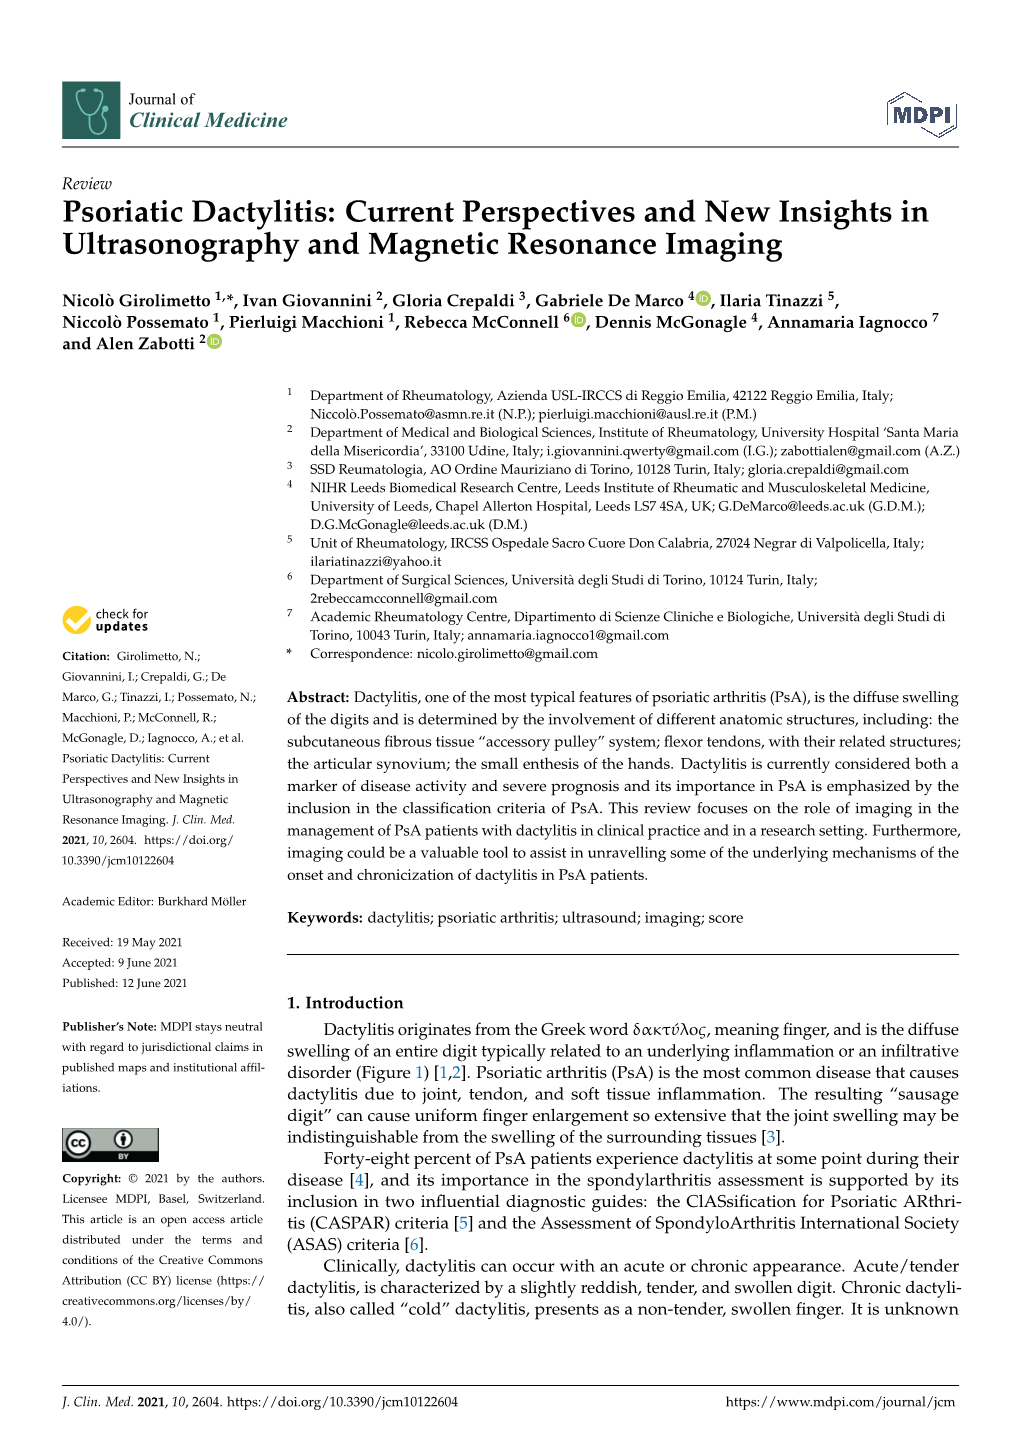 Psoriatic Dactylitis: Current Perspectives and New Insights in Ultrasonography and Magnetic Resonance Imaging